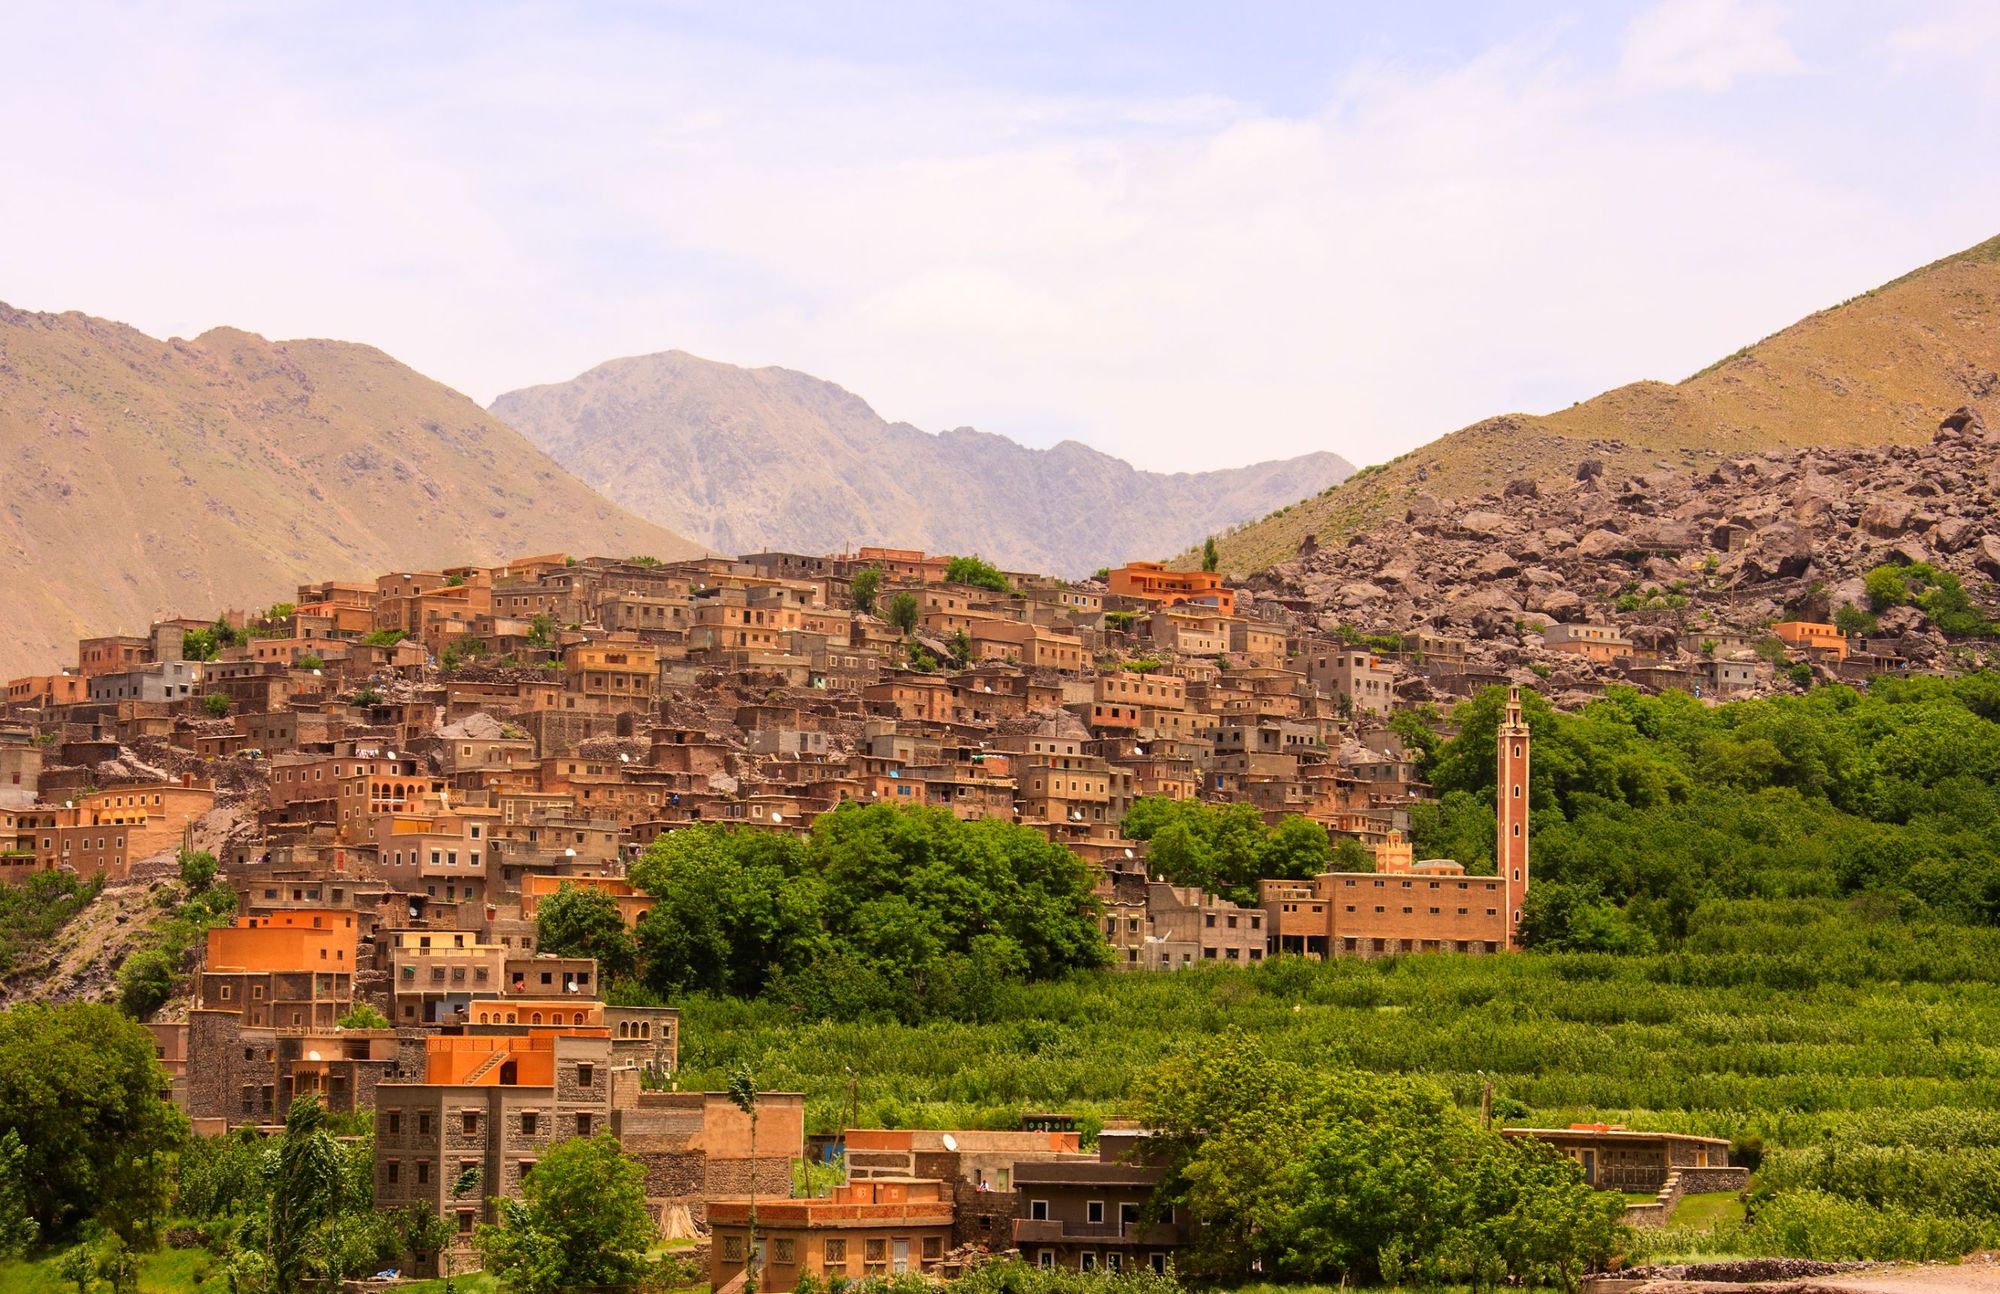 Aremd, a beautiful Amazigh village in the Ait Mizane Valley of the High Atlas Mountains of Morocco. Photo: Getty